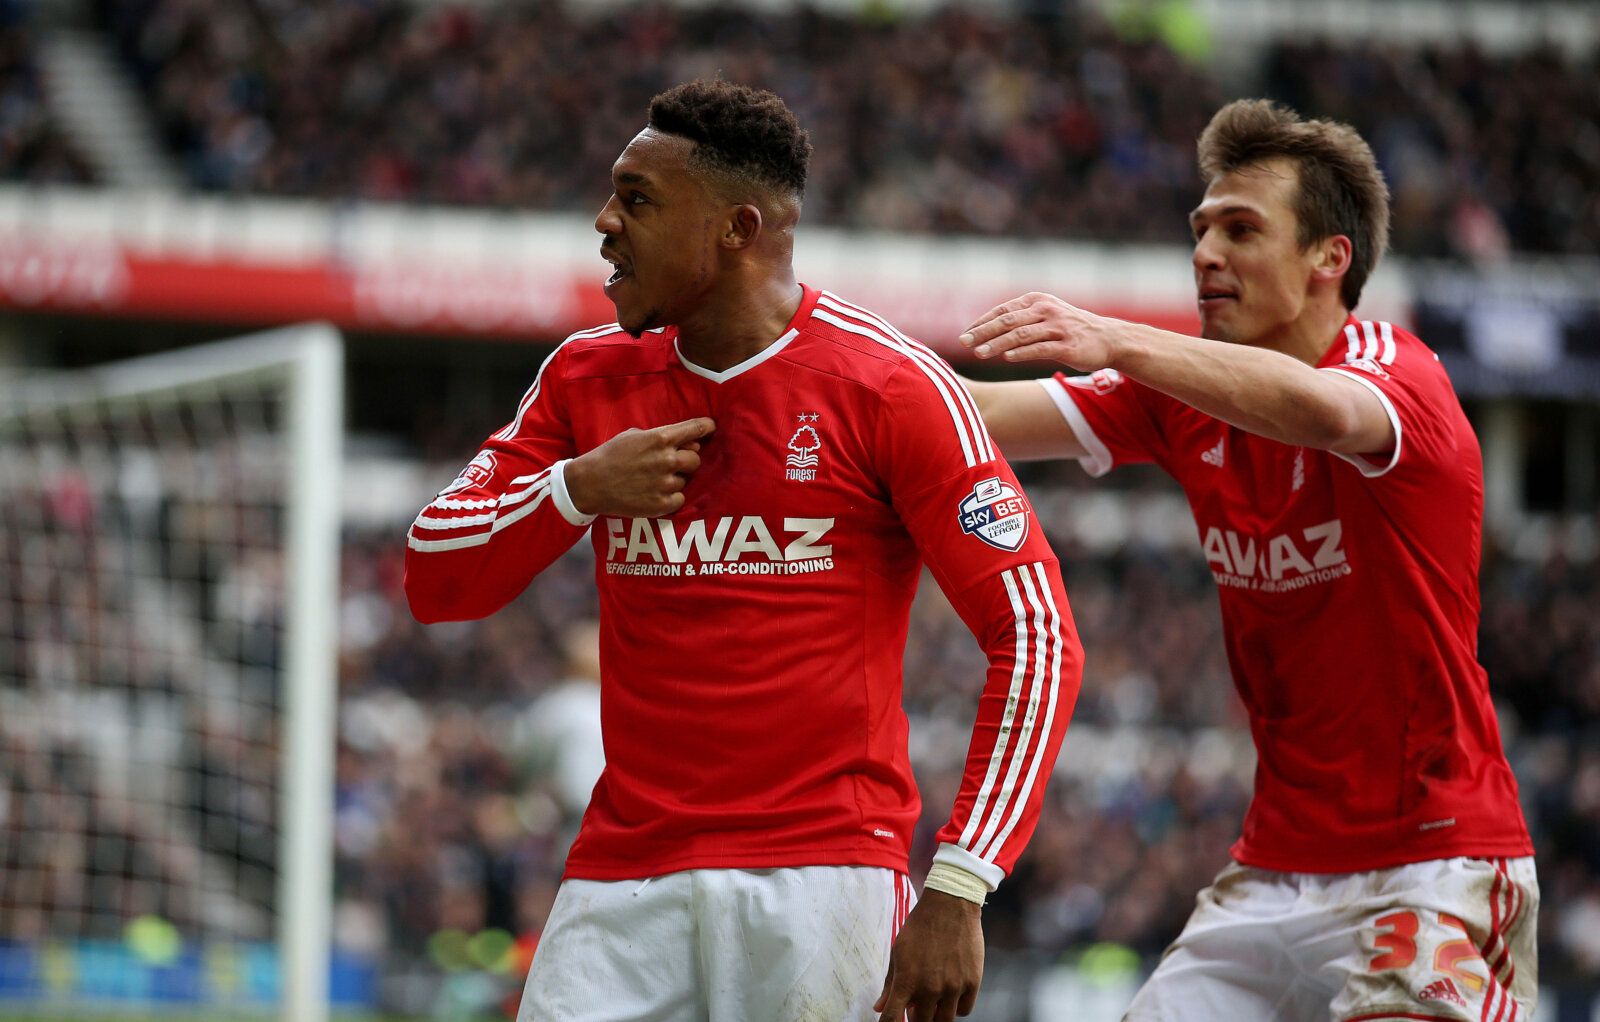 Football - Derby County v Nottingham Forest - Sky Bet Football League Championship - iPro Stadium - 17/1/15 
Nottingham Forest's Britt Assombalonga celebrates scoring his sides first goal 
Mandatory Credit: Action Images / Steven Paston 
Livepic 
EDITORIAL USE ONLY. No use with unauthorized audio, video, data, fixture lists, club/league logos or 